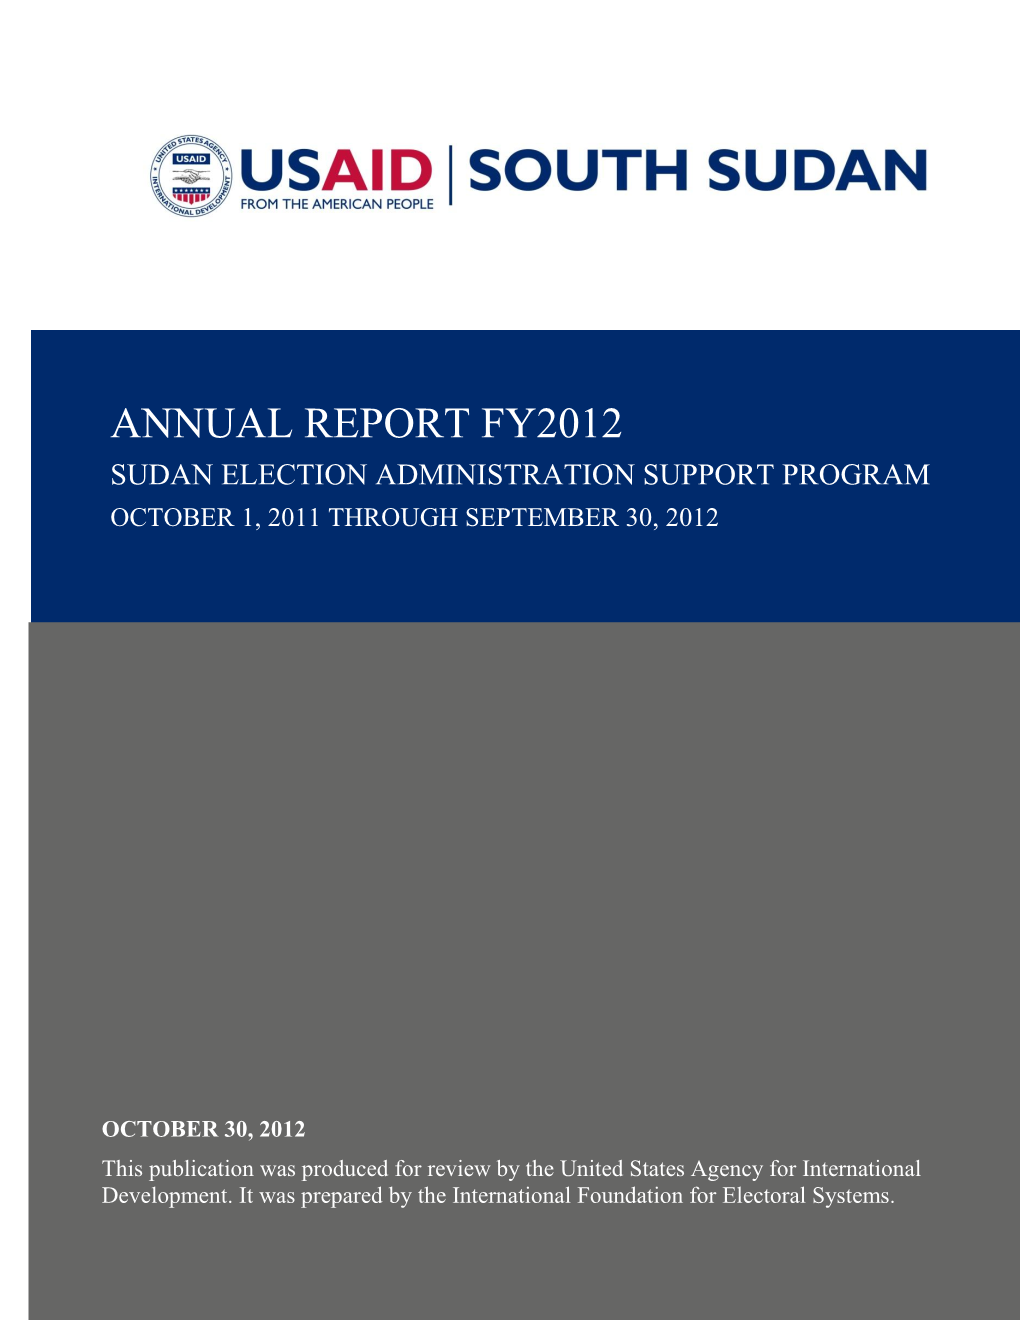 Annual Report Fy2012 Sudan Election Administration Support Program October 1, 2011 Through September 30, 2012